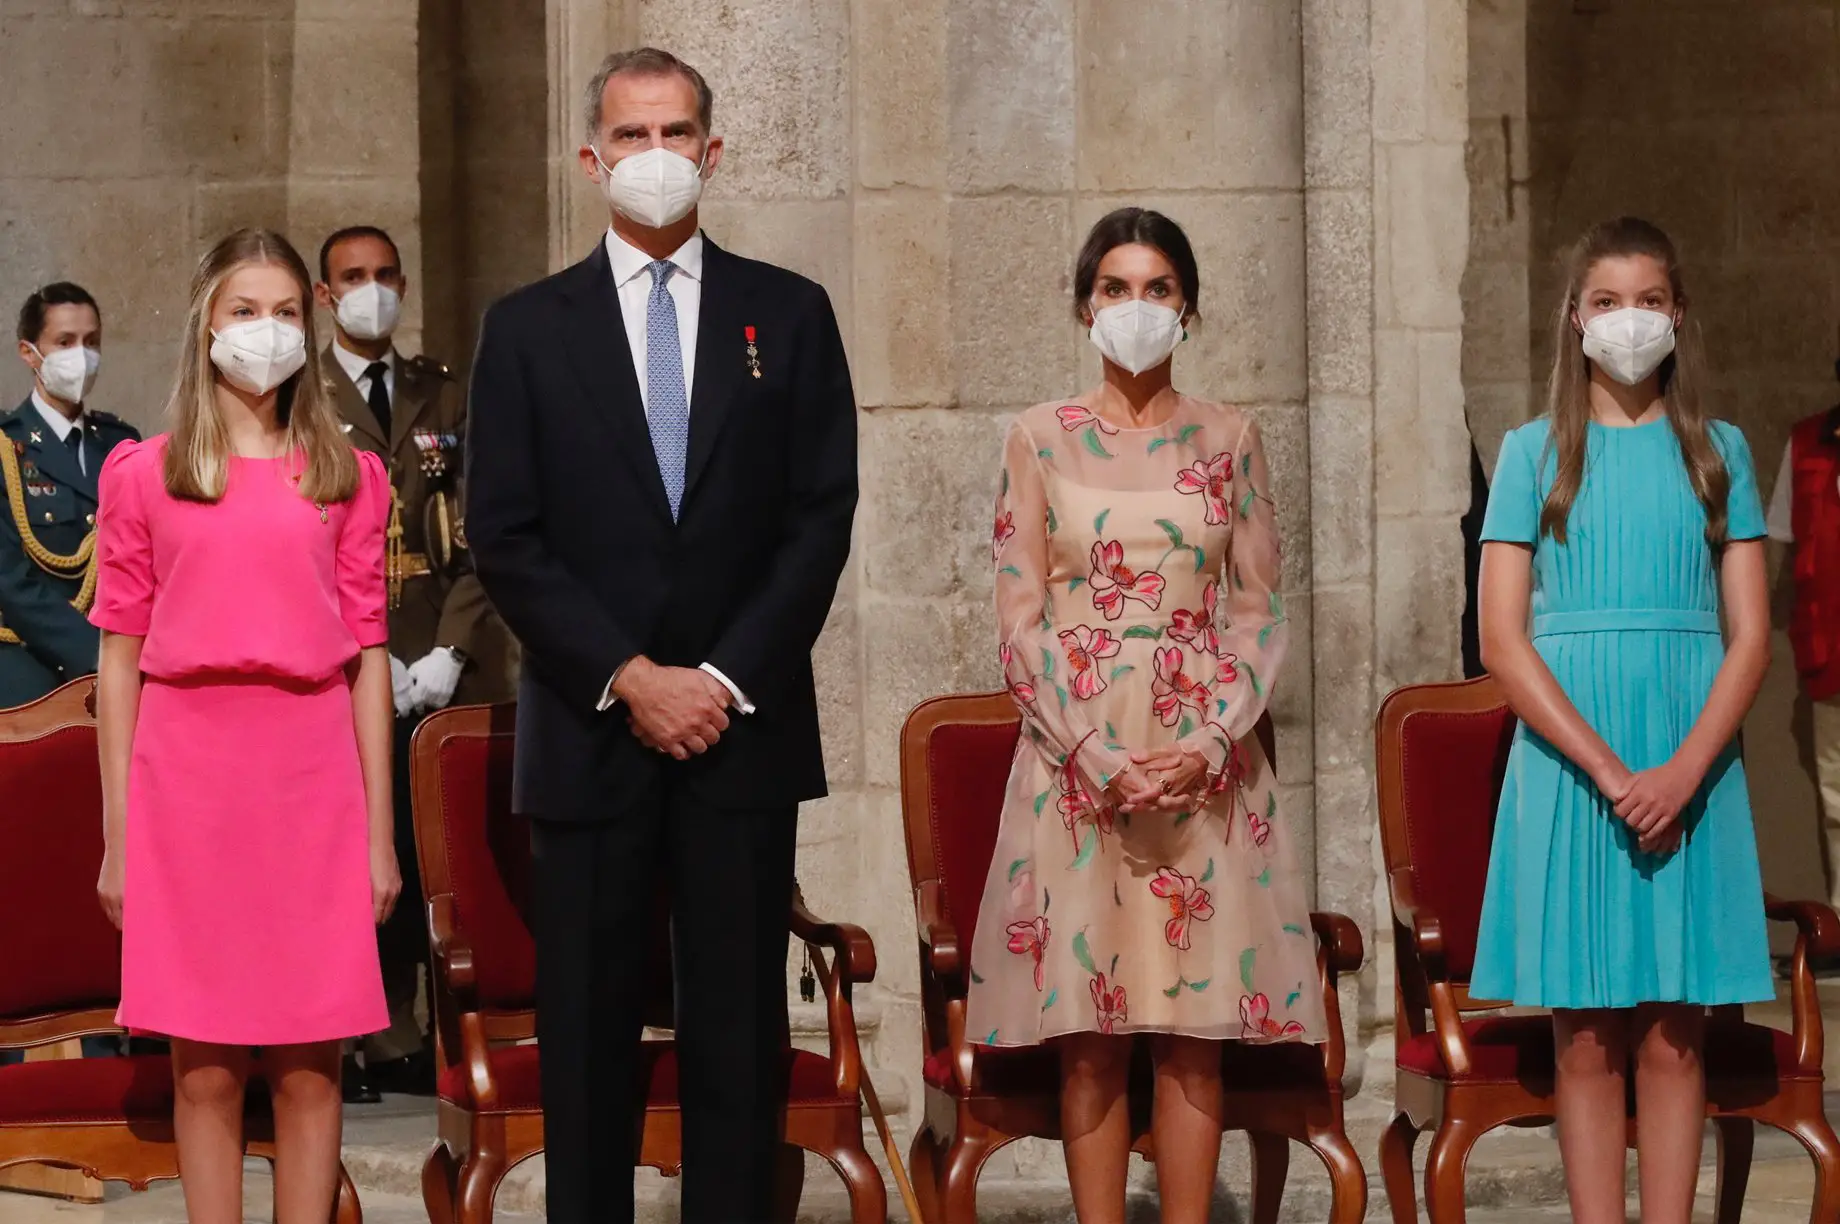 Spanish Royal Family today attended the National Offering to the Apostle Santiago, Patron Saint of Spain